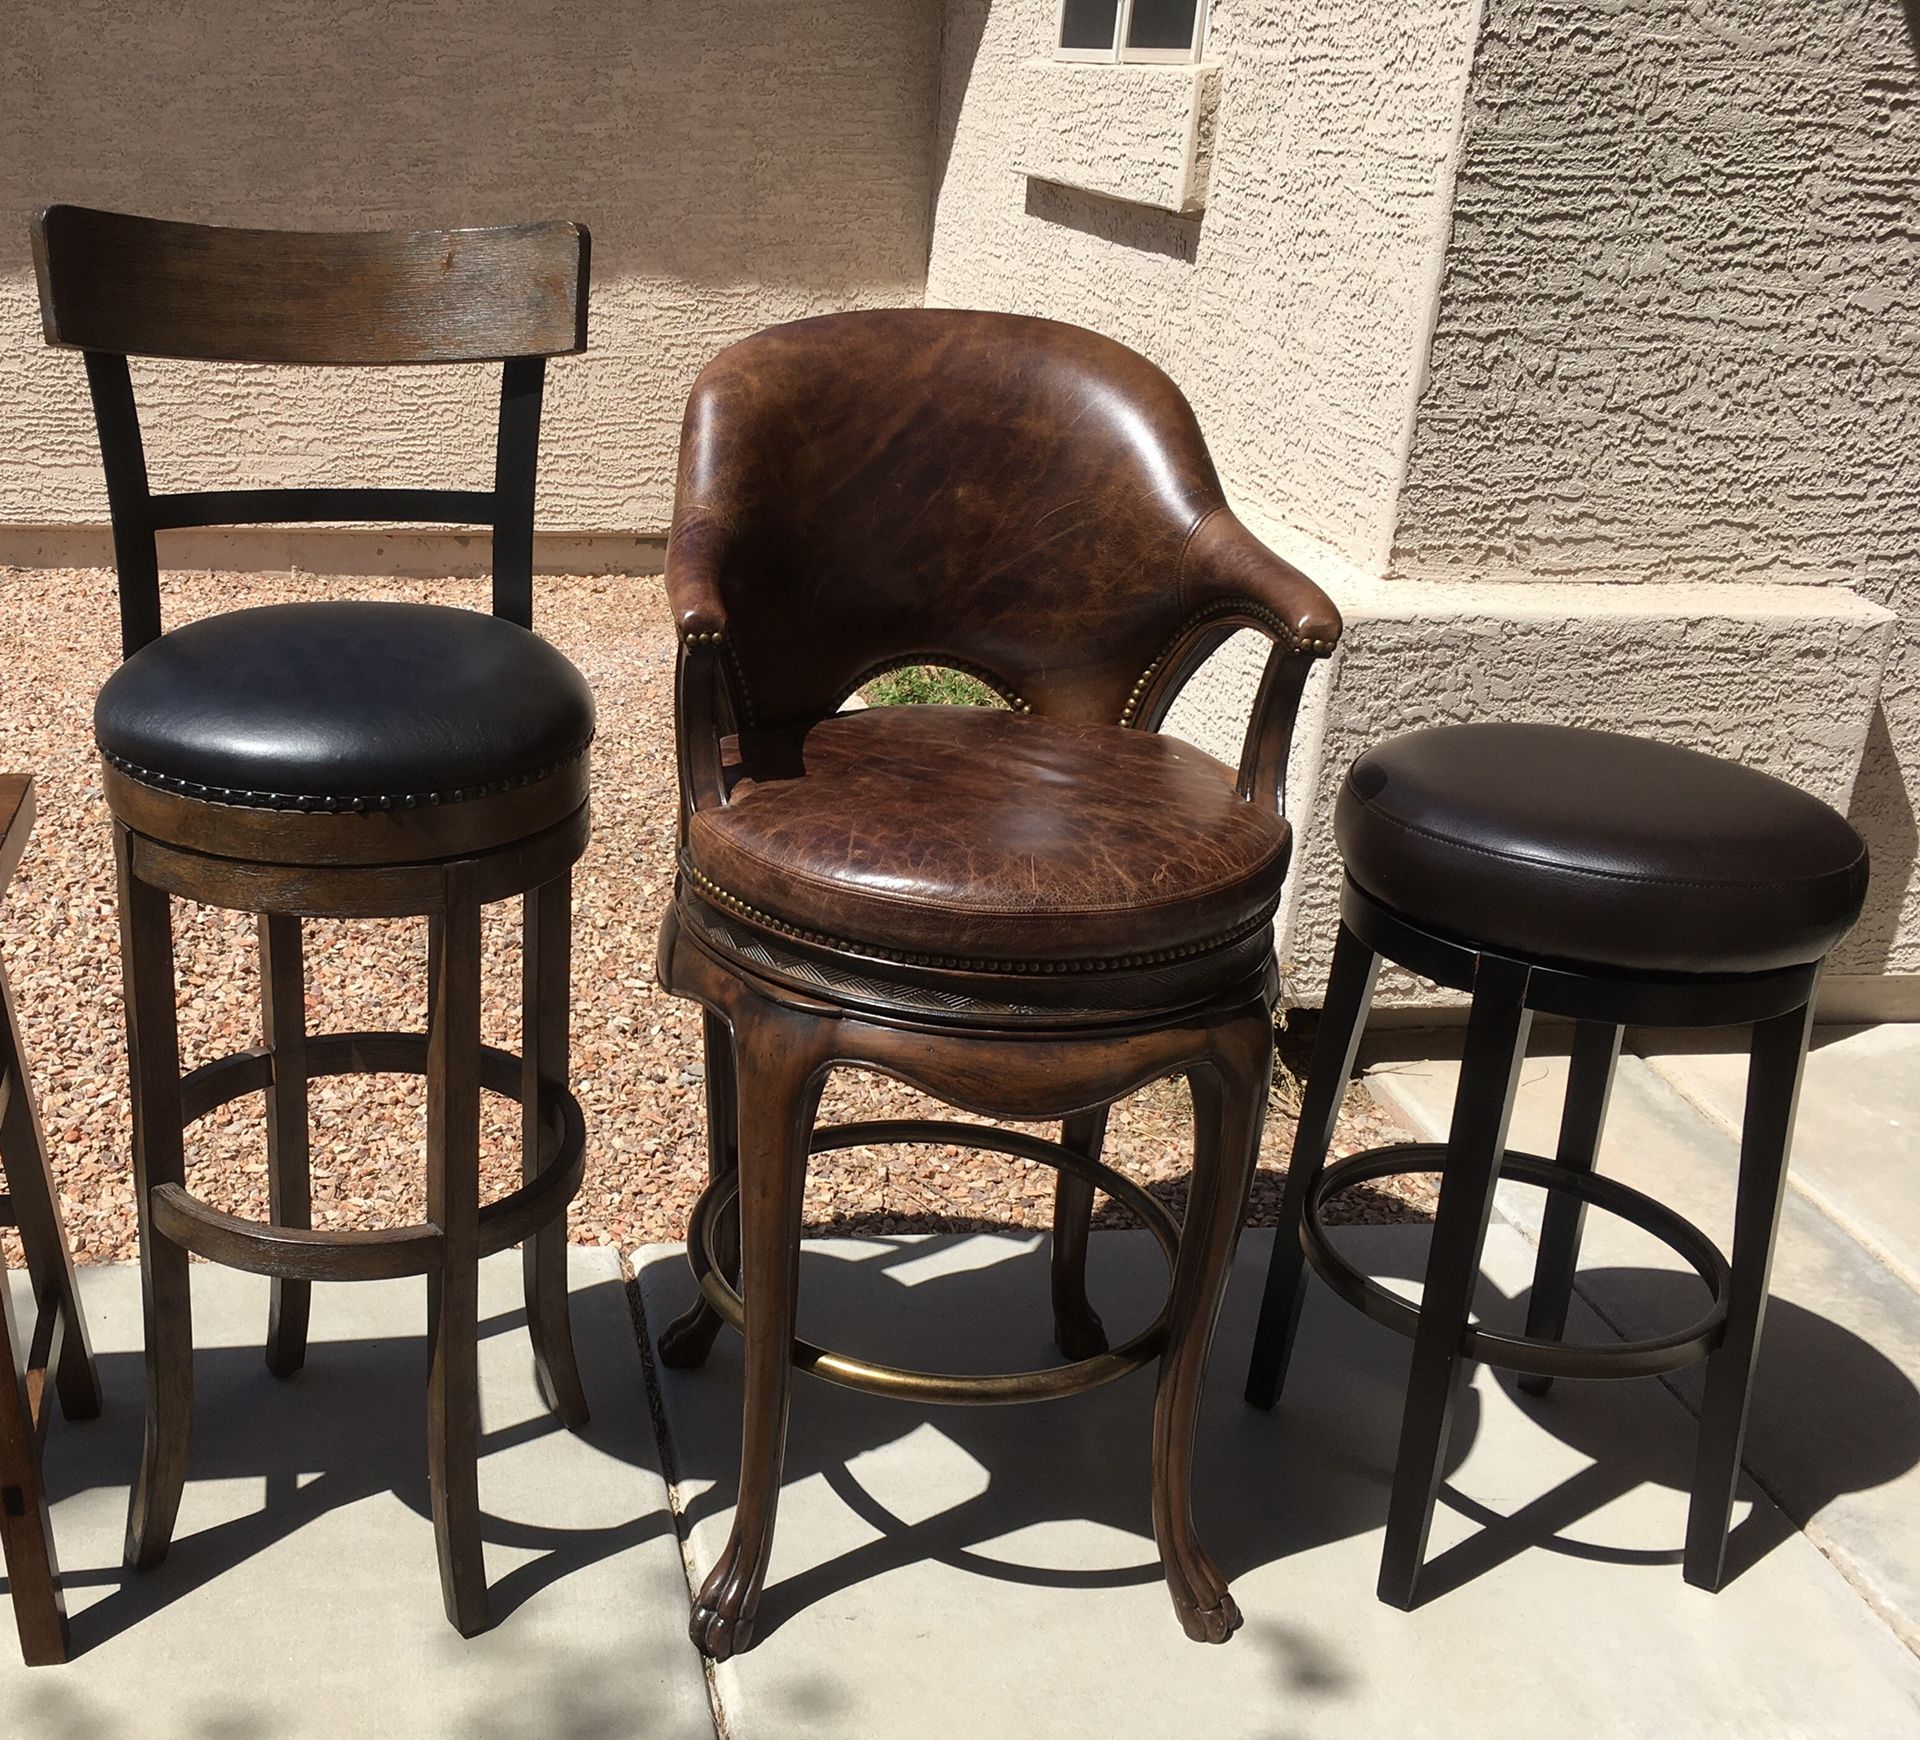 Billiards chairs/ stools $40 For 1!!!